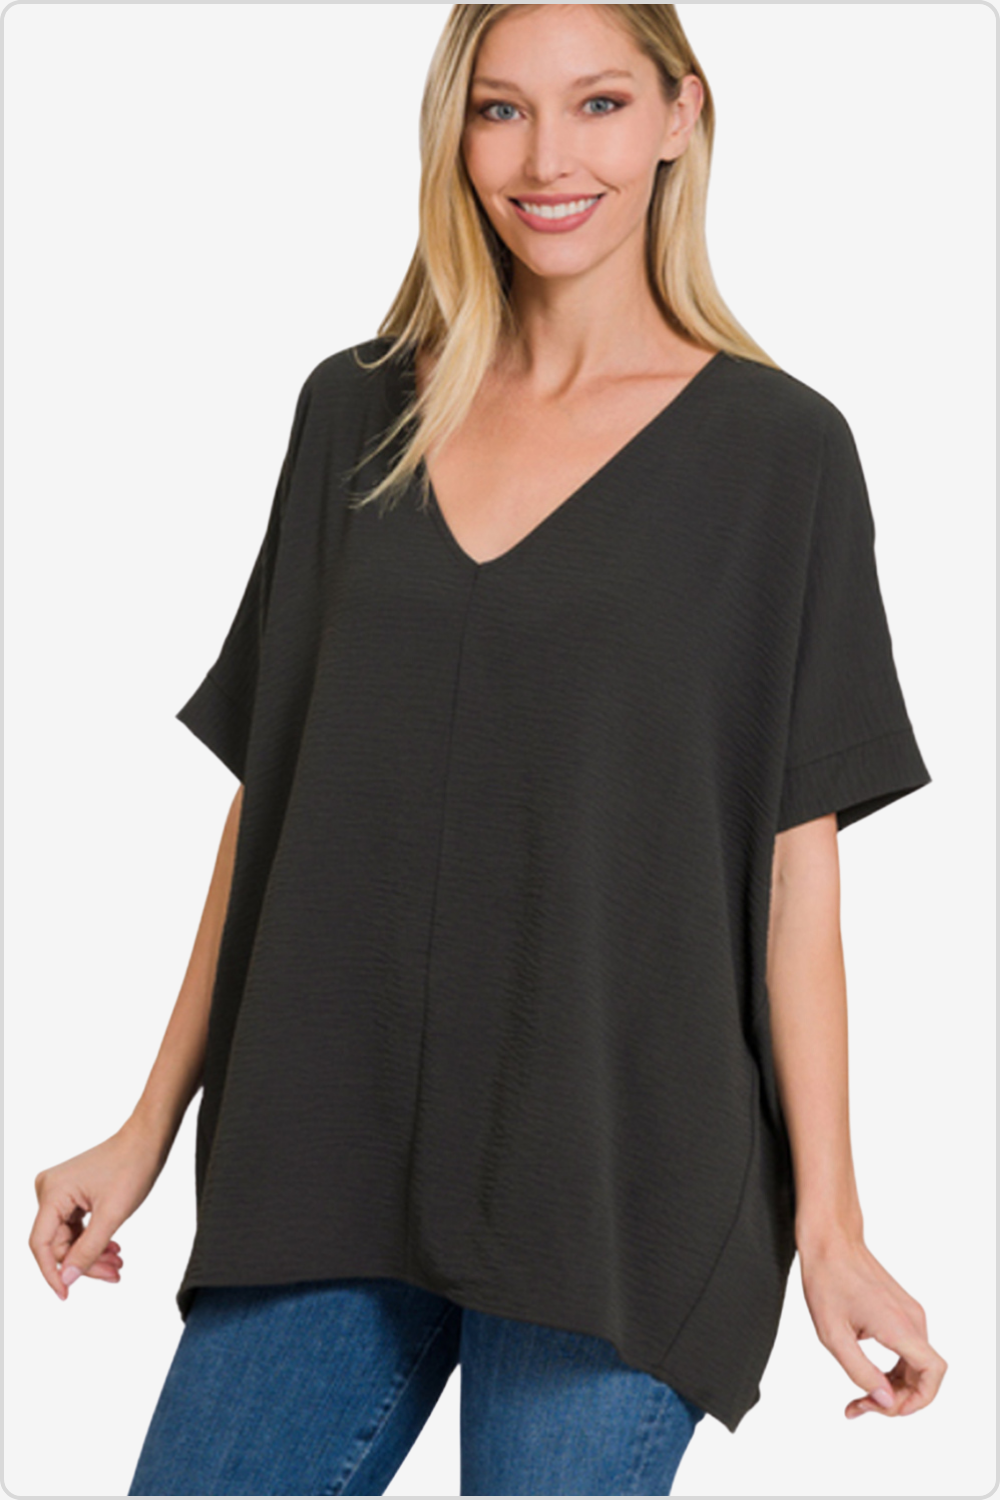 Classic V-neck short sleeve top, a versatile addition to any wardrobe, front view